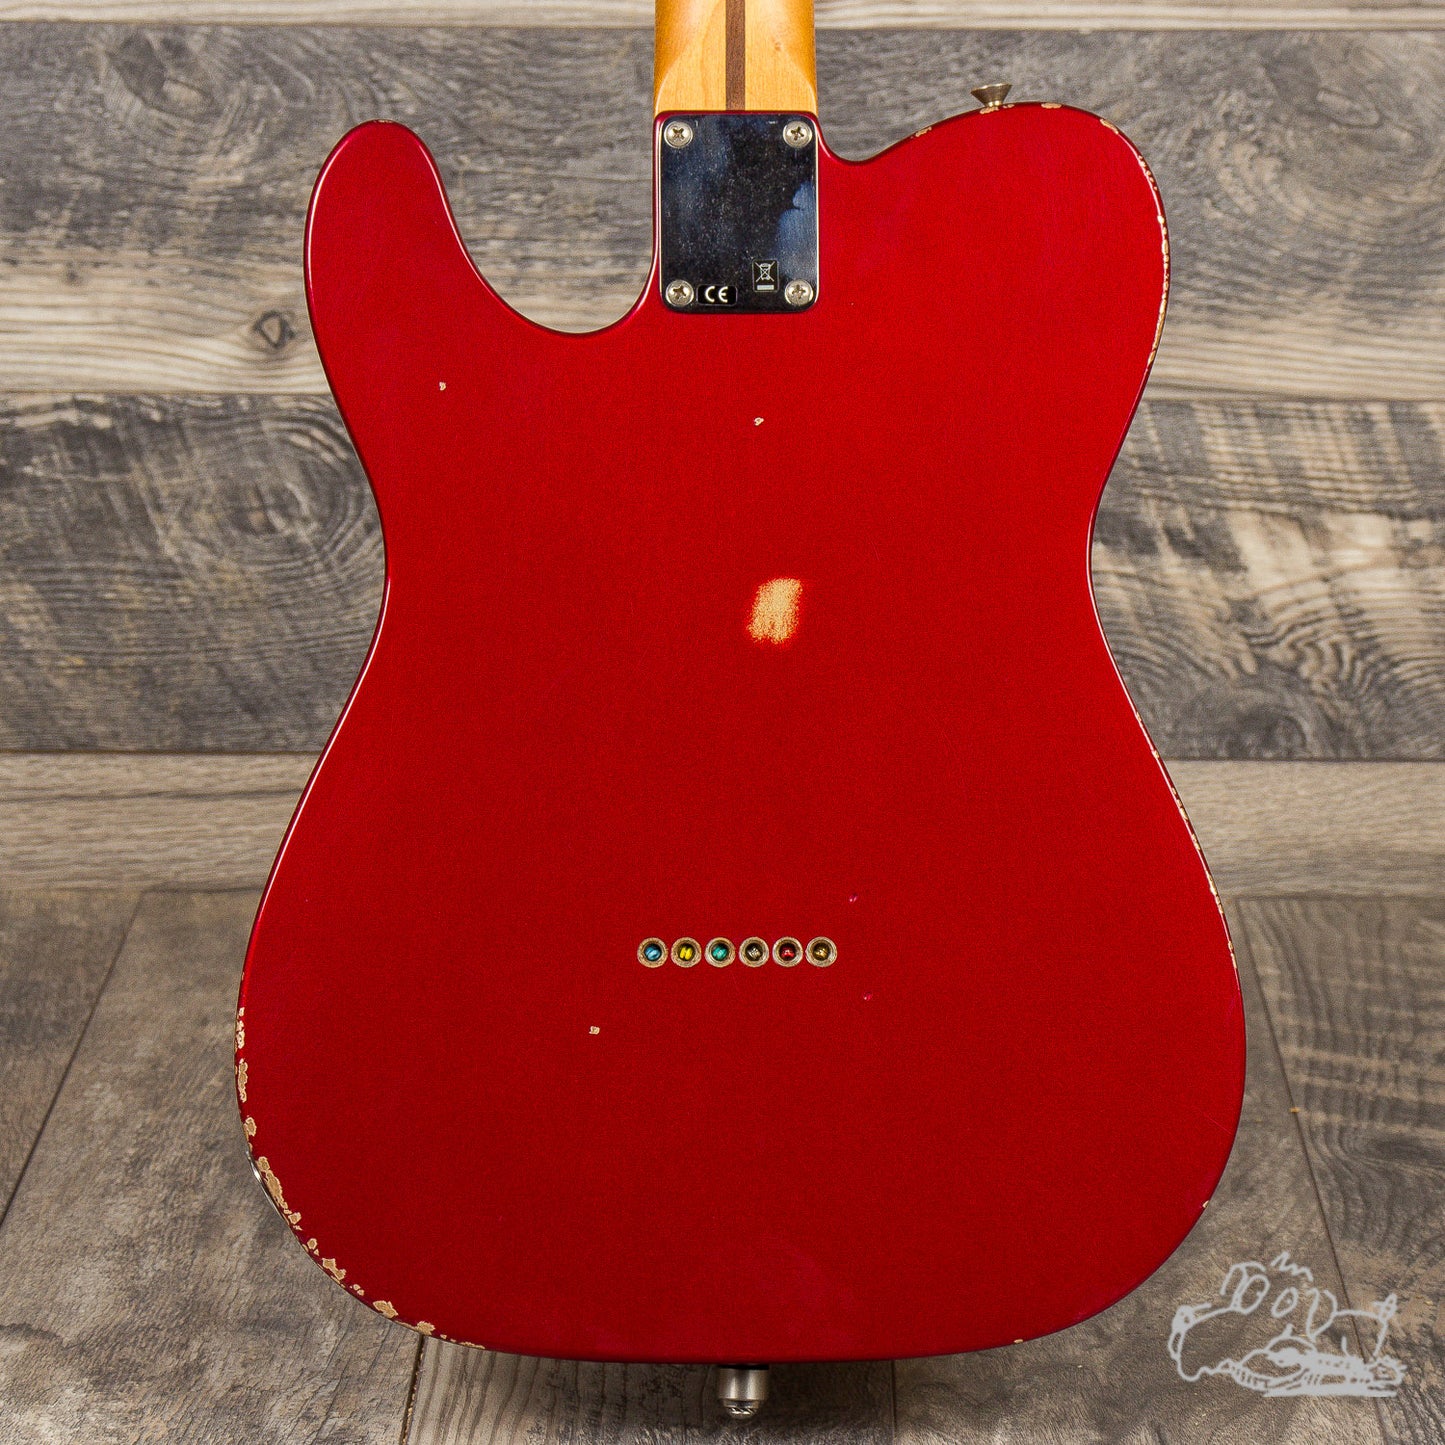 2018 Fender Road Worn Telecaster Special Edition - Candy Apple Red